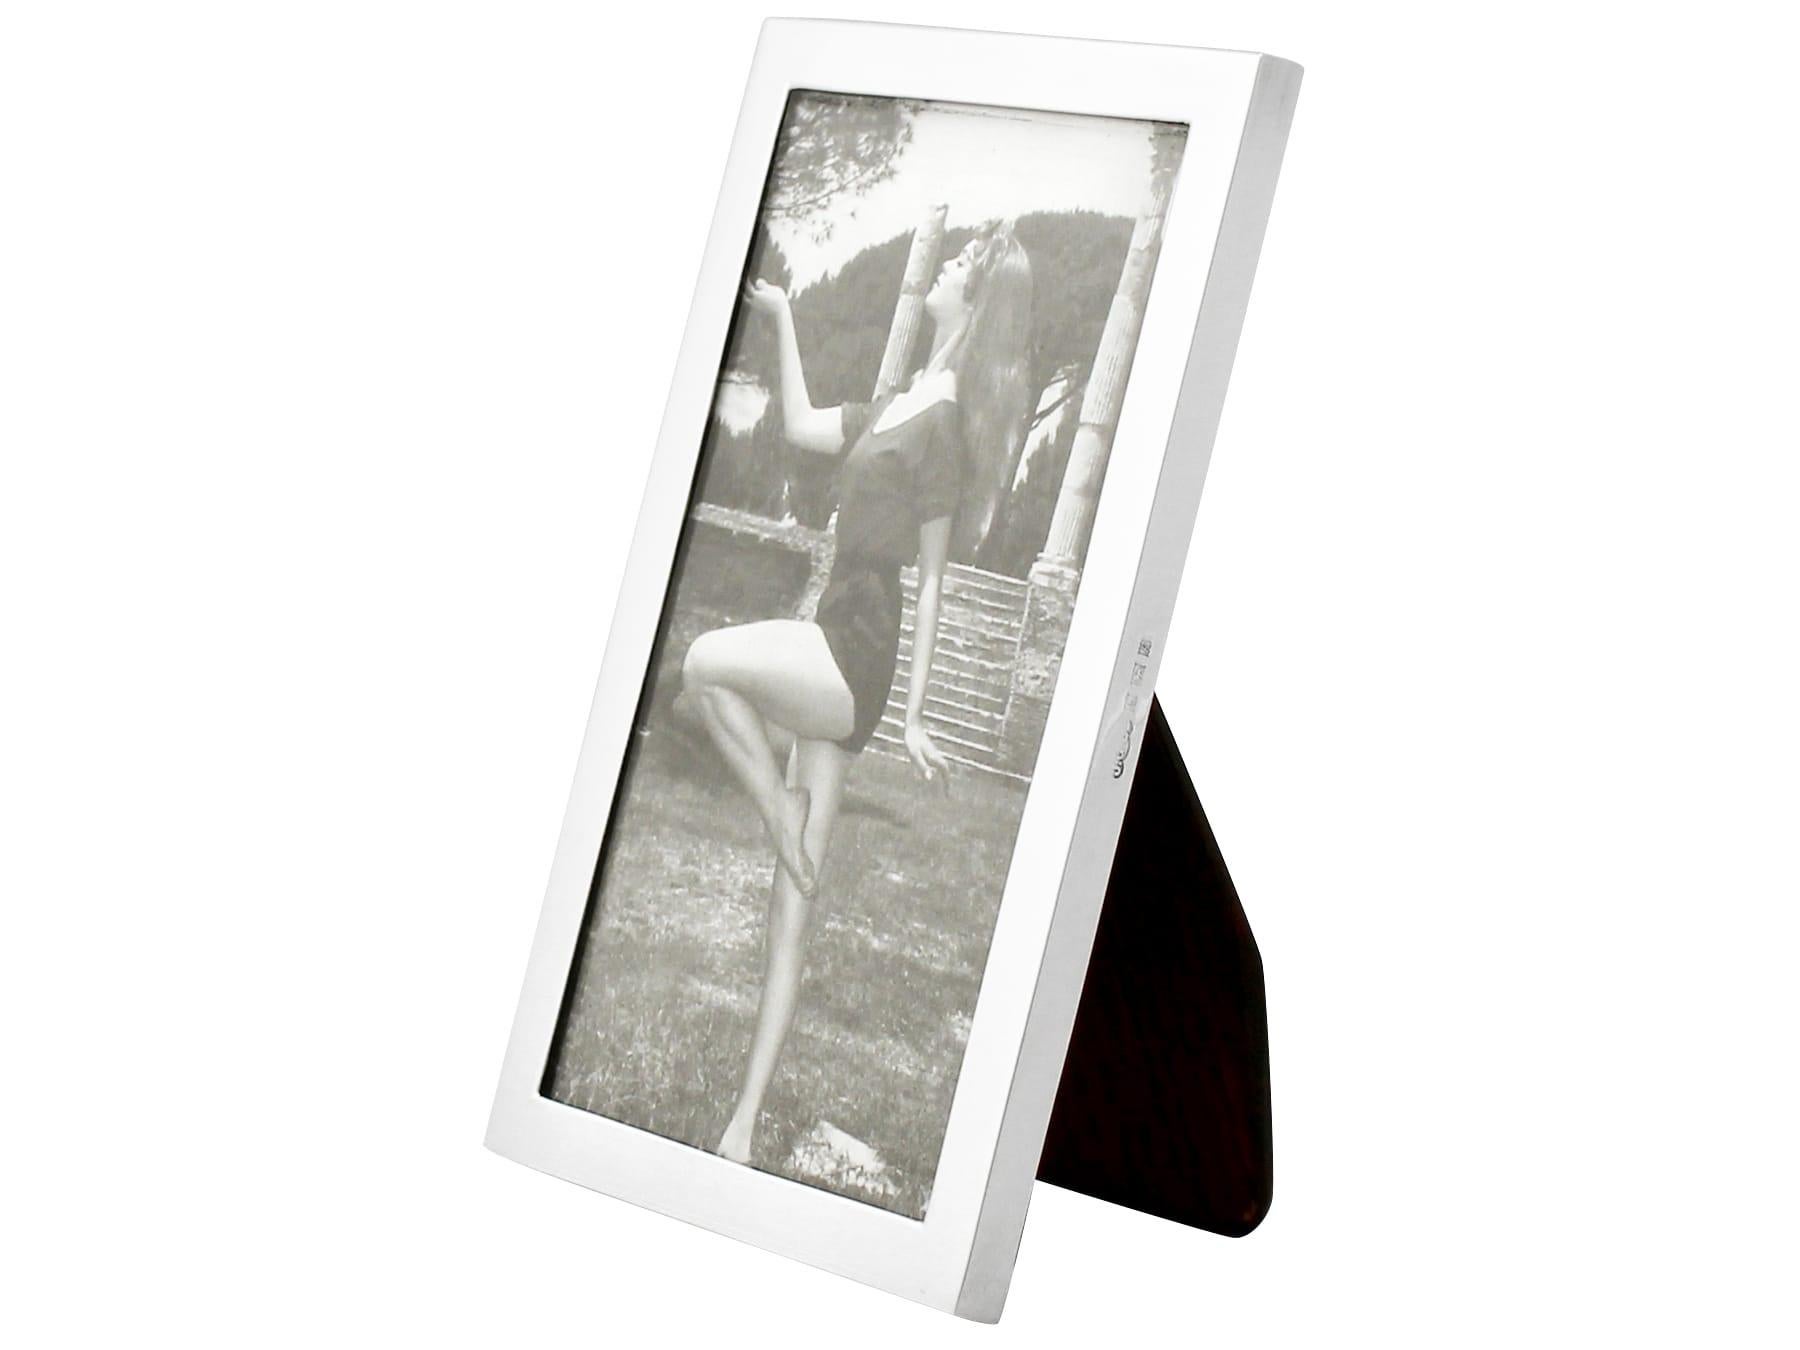 An exceptional, fine and impressive vintage Elizabeth II English sterling silver photograph frame; an addition to our ornamental silverware collection.

This exceptional vintage Elizabeth II sterling silver photo frame has a plain rectangular